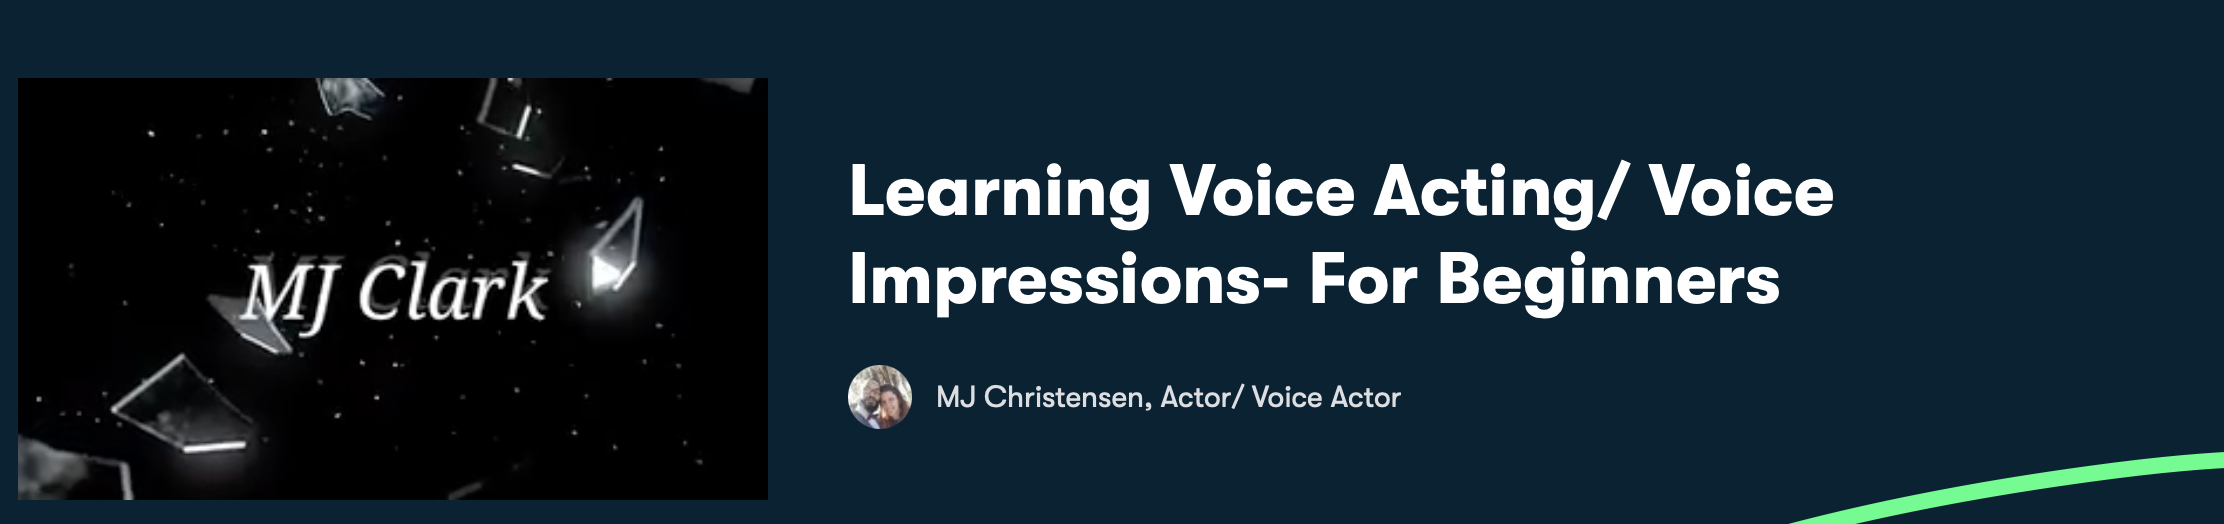 Learning Voice Acting:Voice Impressions for Beginners